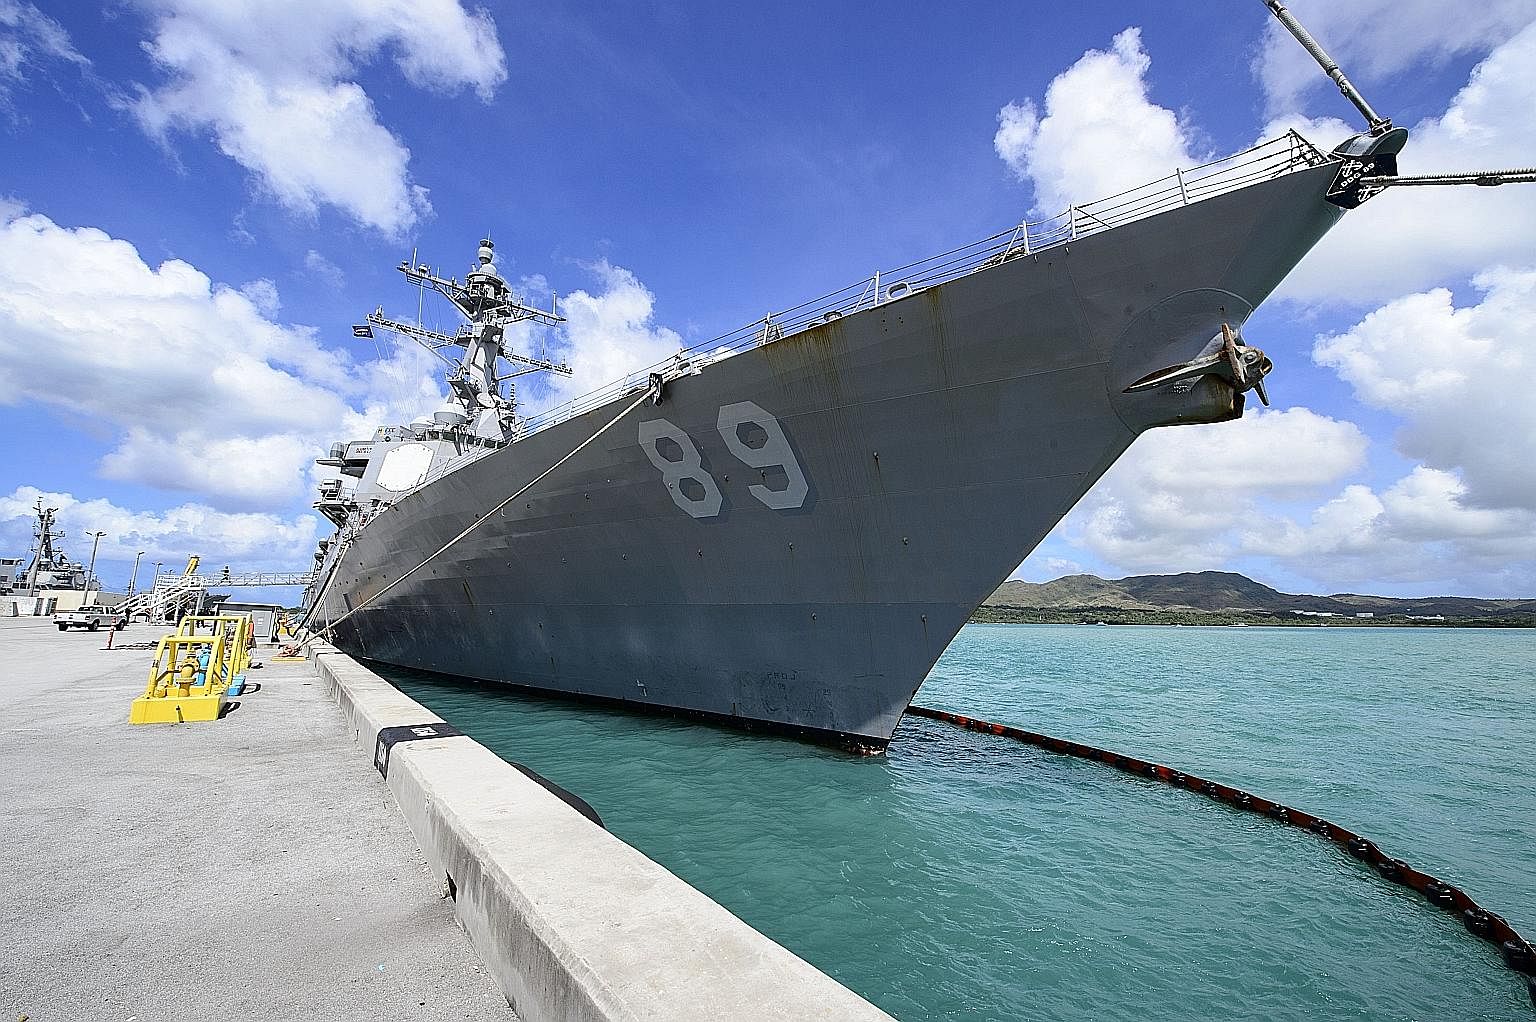 The US Navy's destroyer Mustin carried out a freedom of navigation operation in March last year, coming within 12 nautical miles of an artificial island built by China in the South China Sea. The US-China rivalry is seen as a disruptive factor in the